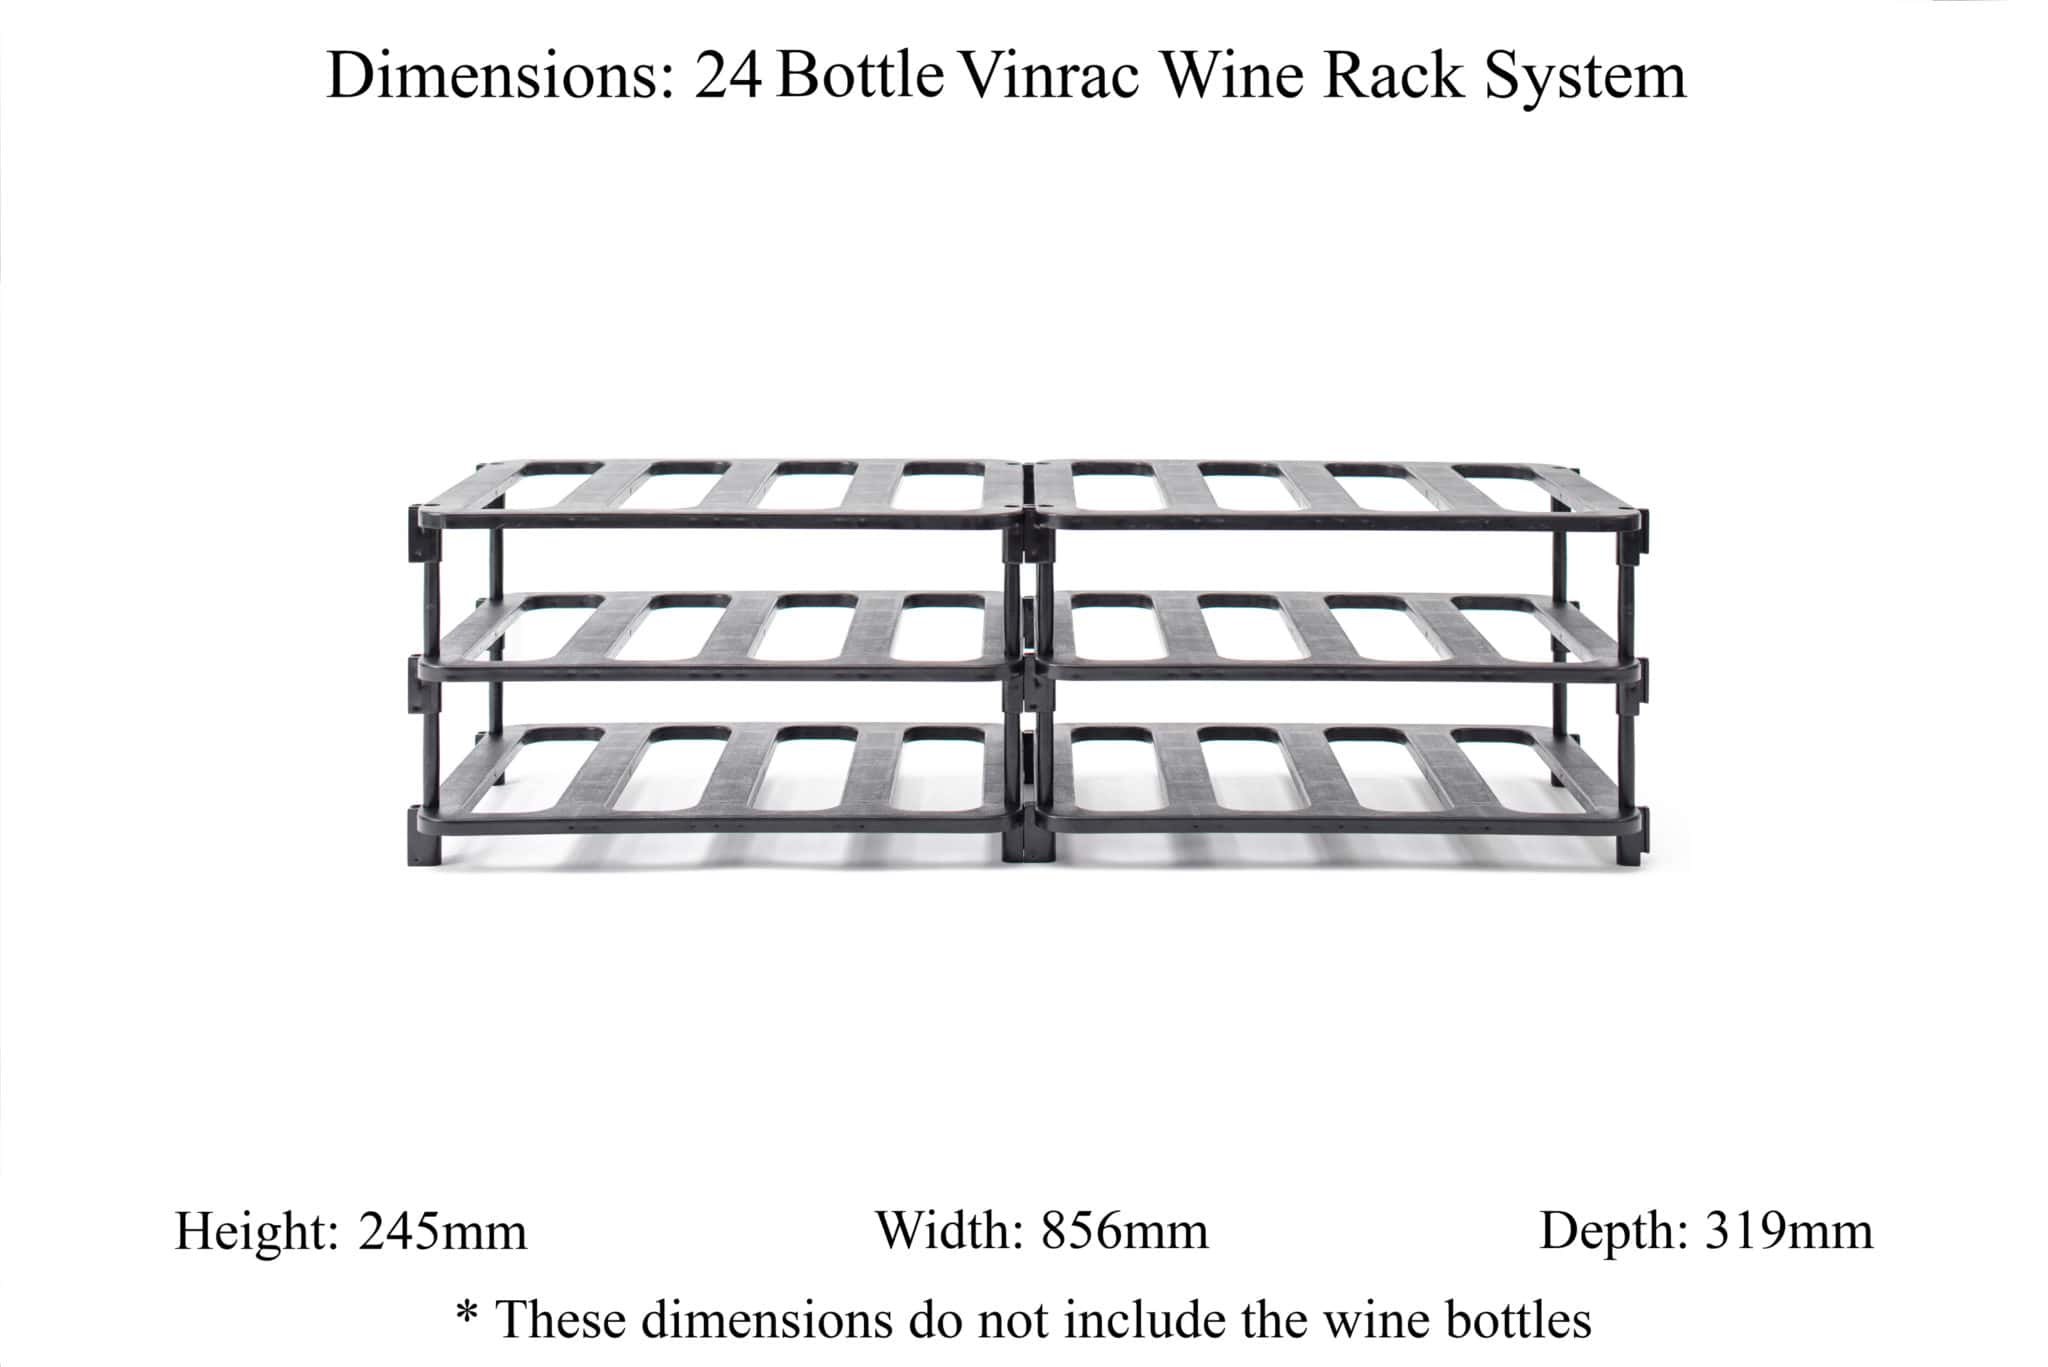 24 Bottle Wine Rack by Vinrac Modular and Affordable